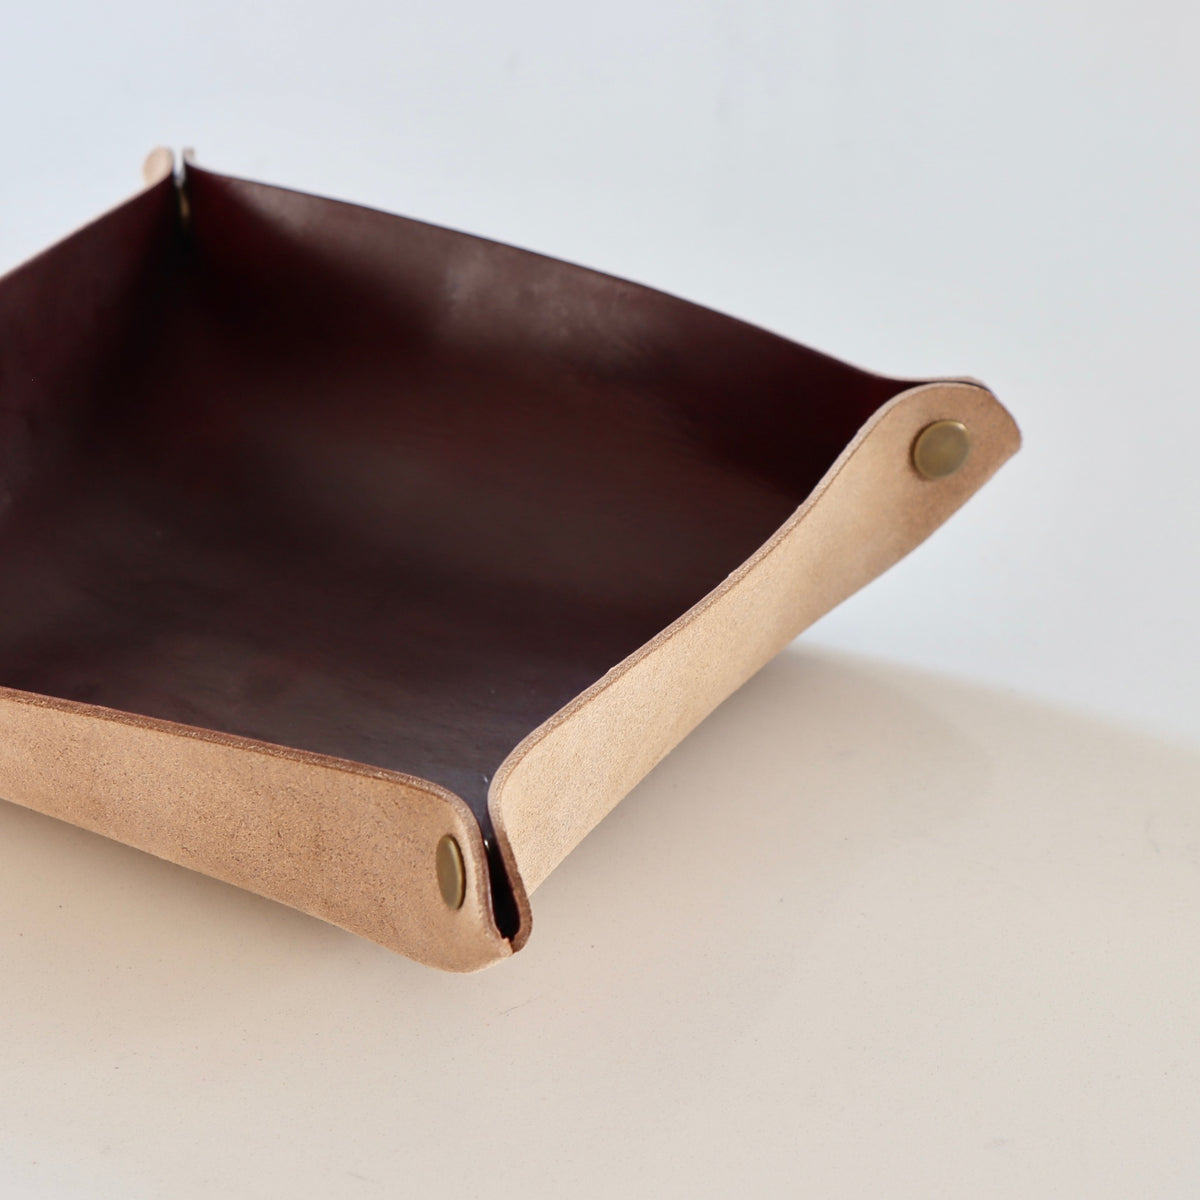 Leather Valet Tray in Horween Burgundy Leather - Holistic Habitat 